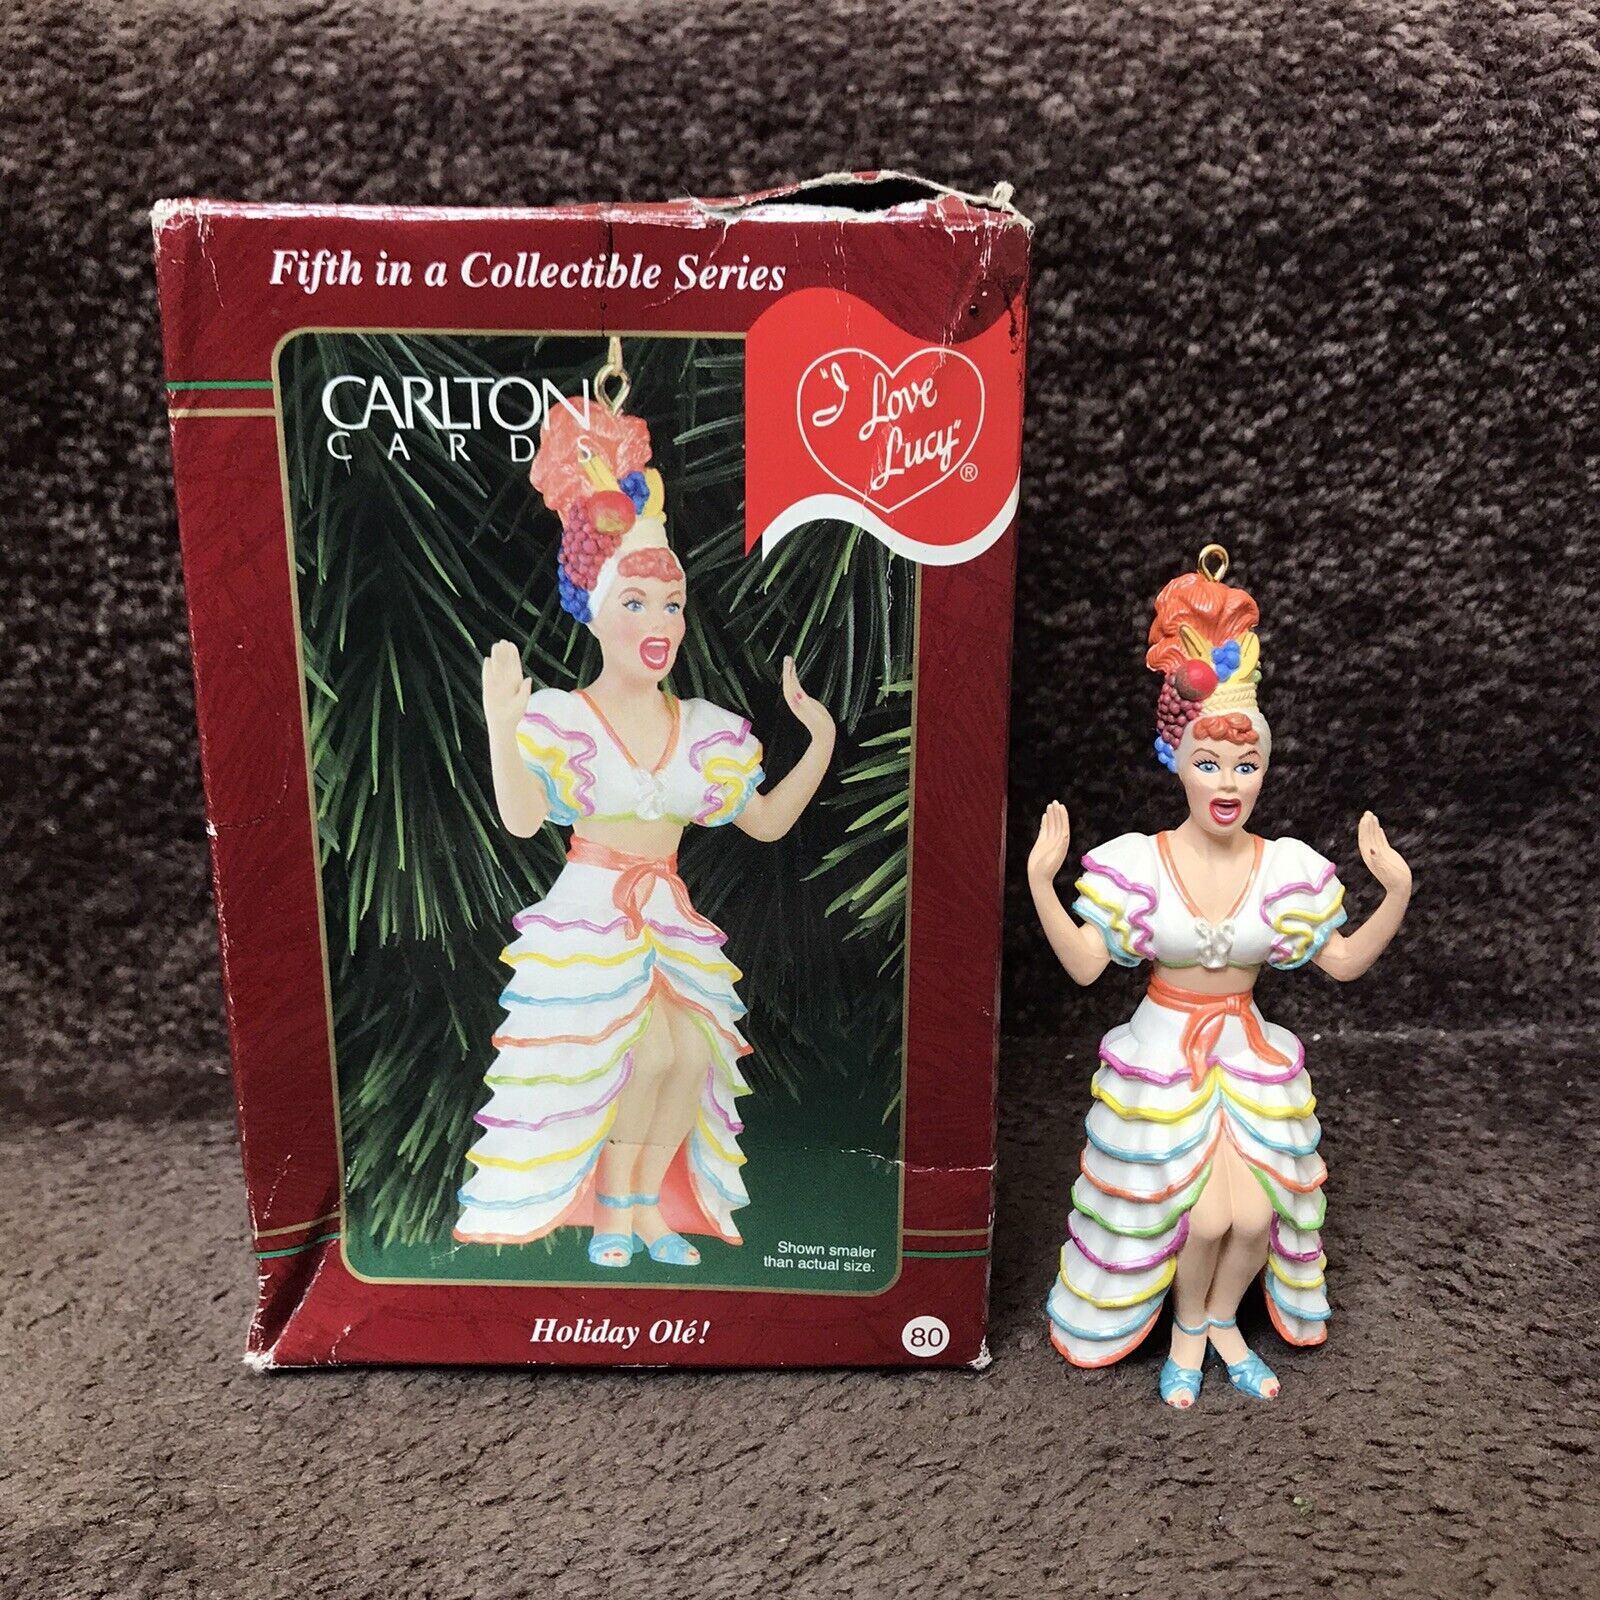 I Love Lucy Ornament HOLIDAY OLE 5th in Series 1999 Carlton Cards Lucille Ball 